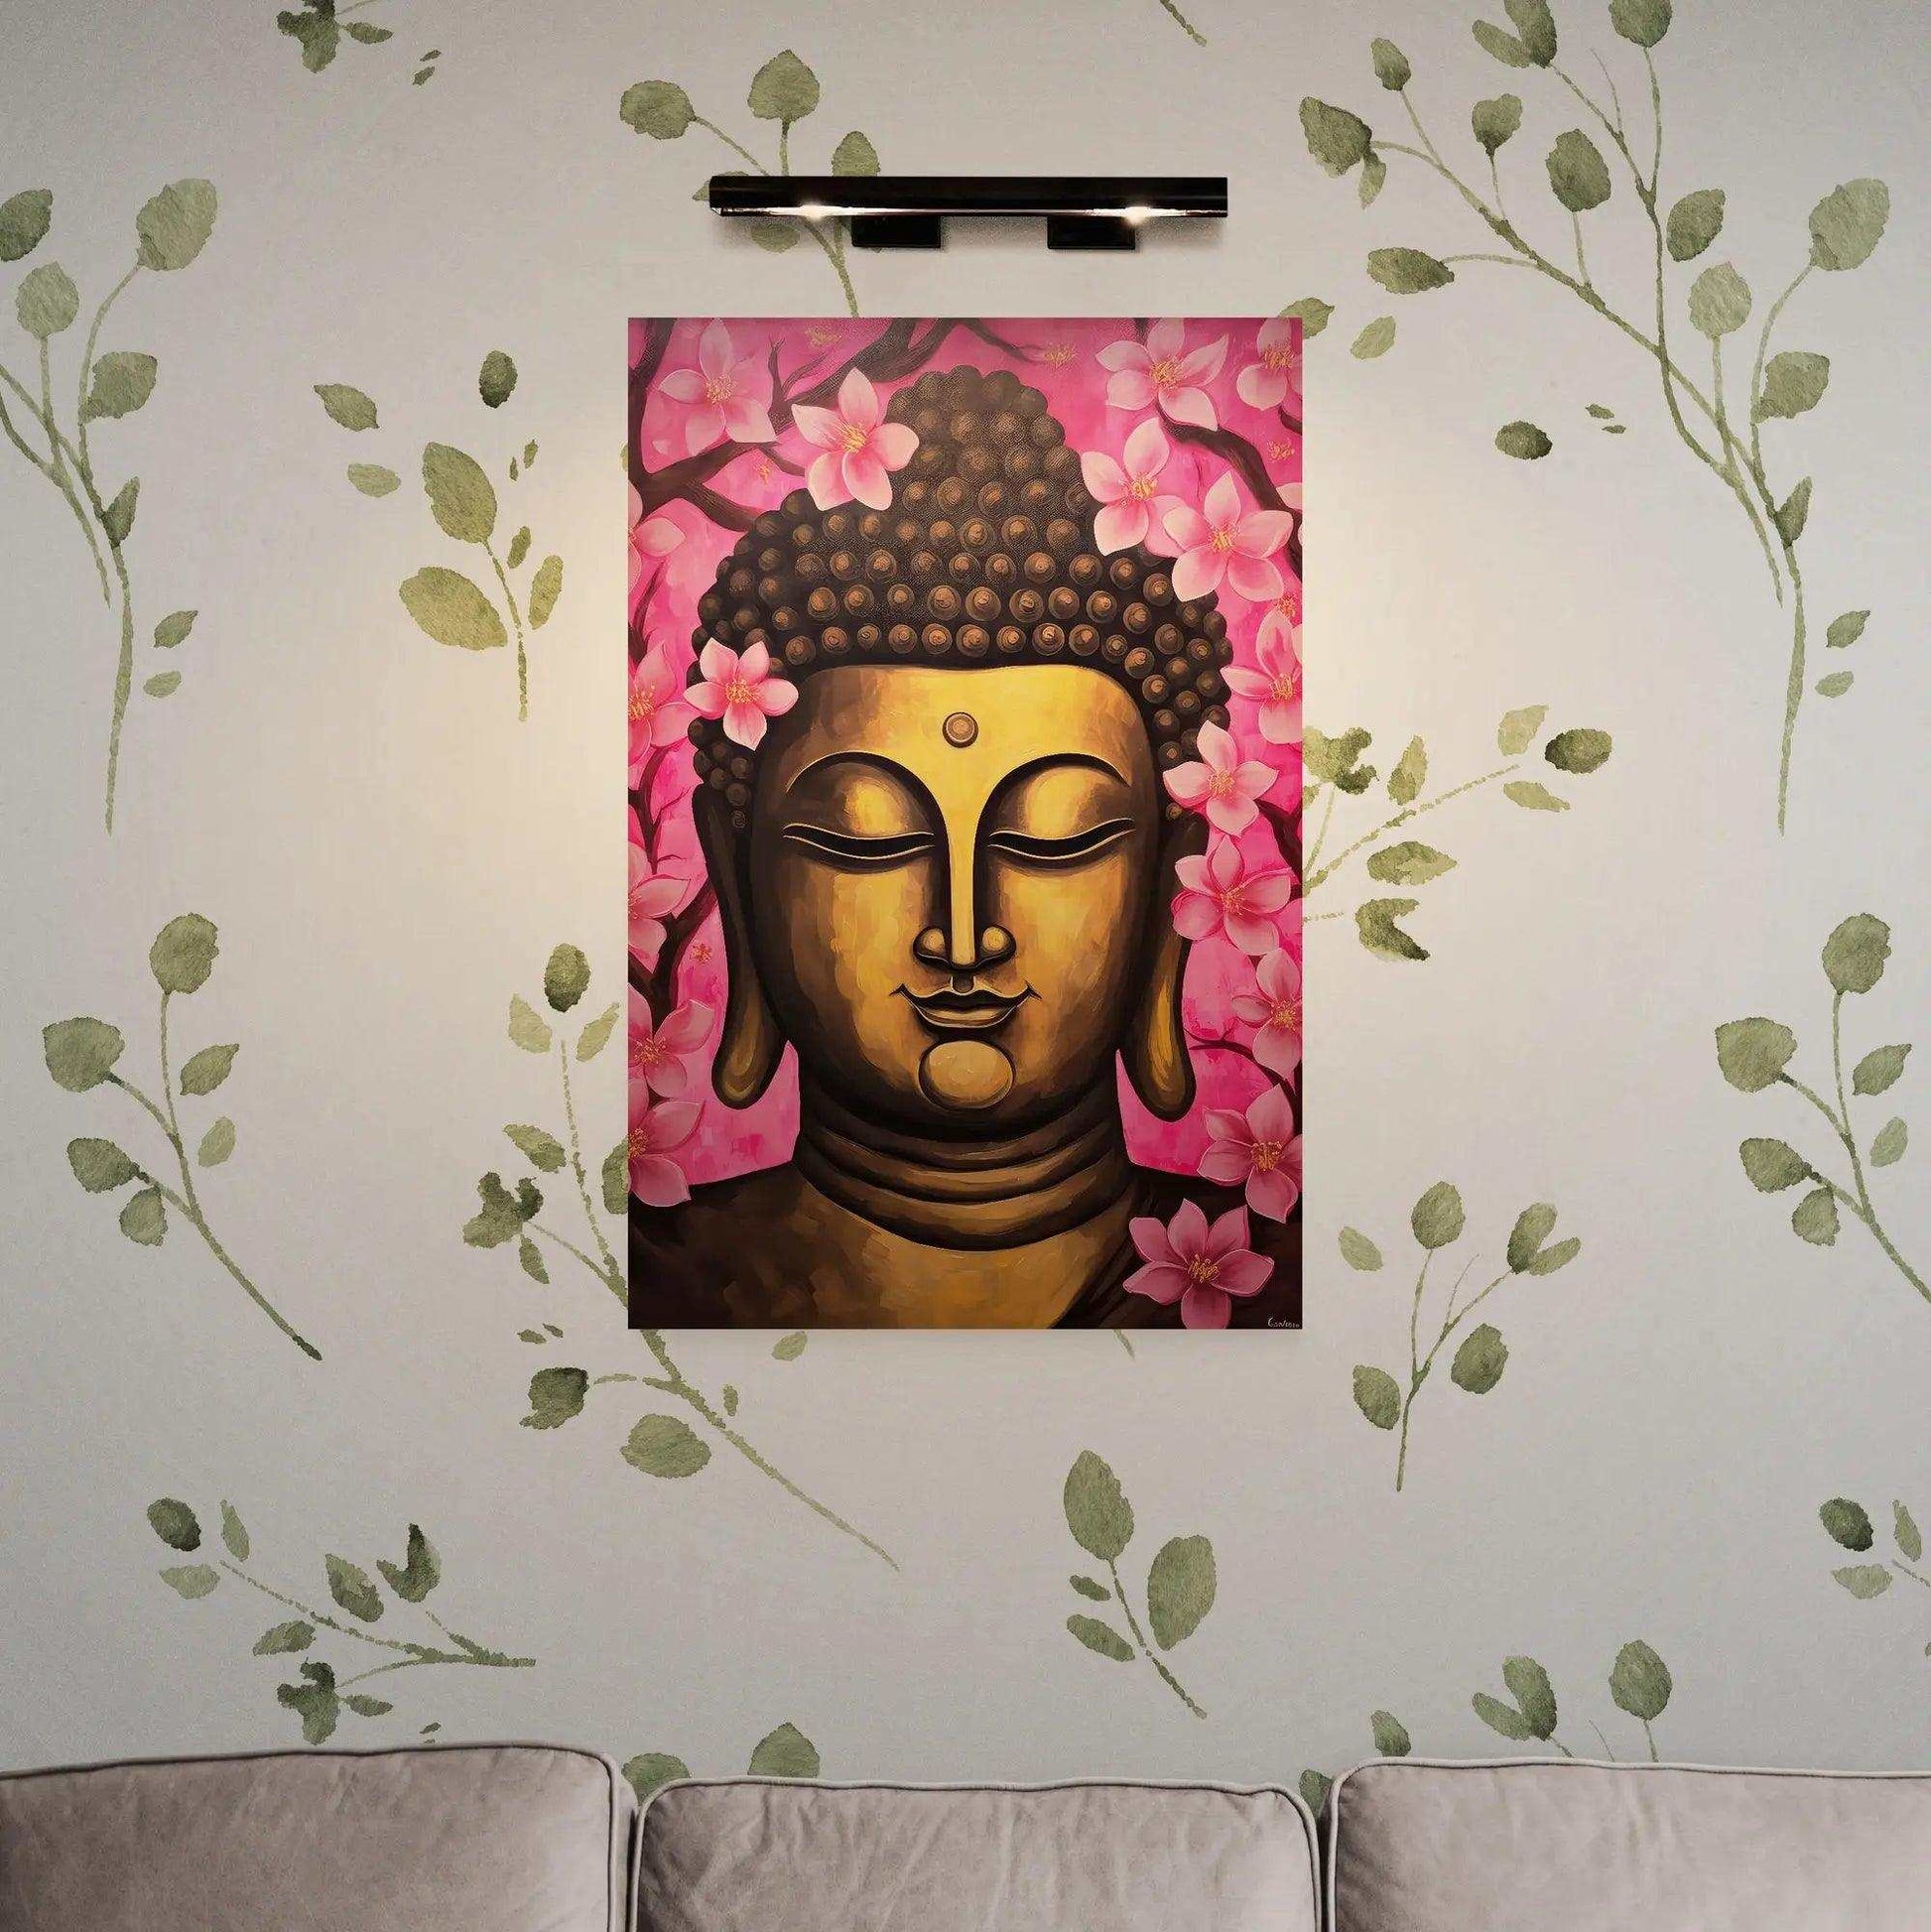 Vibrant Buddha portrait with radiant gold and pink tones, embellished by a backdrop of cherry blossoms, mounted on a wall with painted greenery, over a grey couch, under a sleek light fixture.